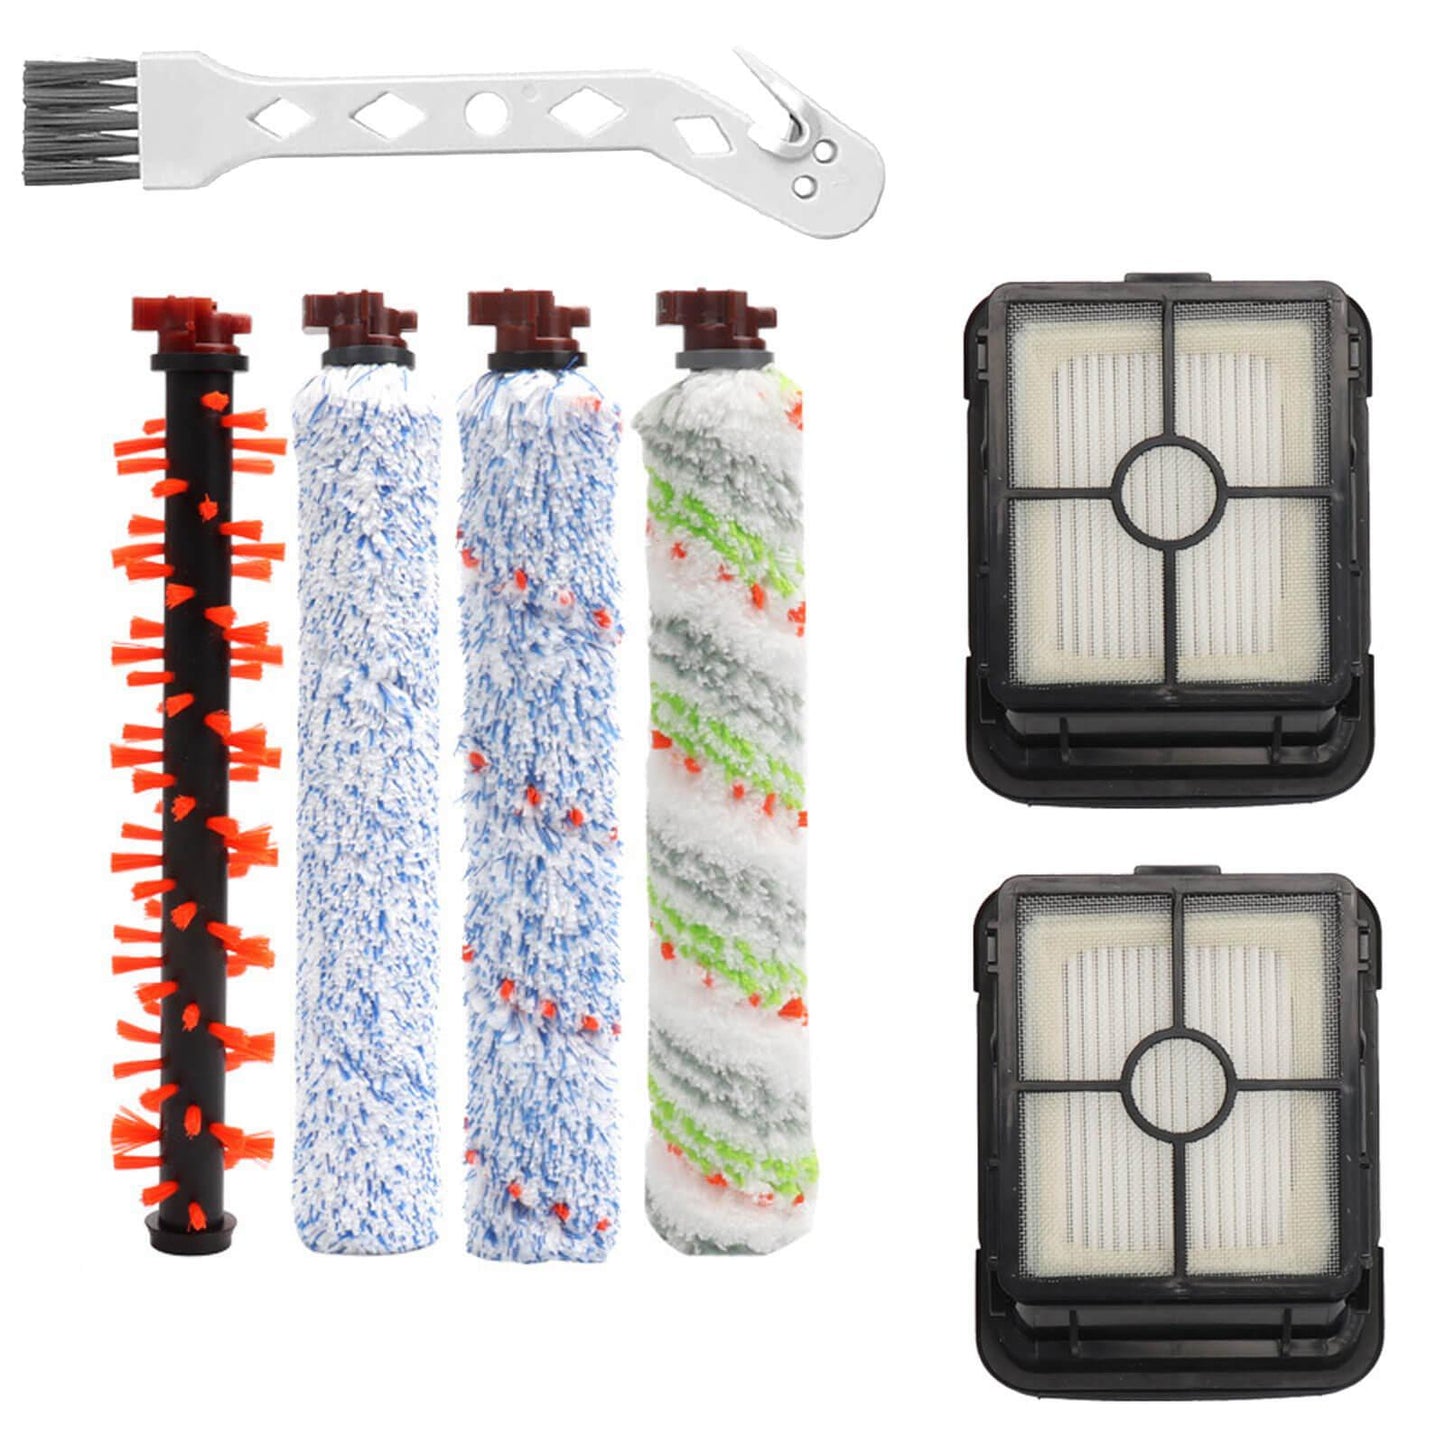 Vacuum filter & brush roll set for Bissell Crosswave 1866 1868 1926 1785 2203F Sparesbarn